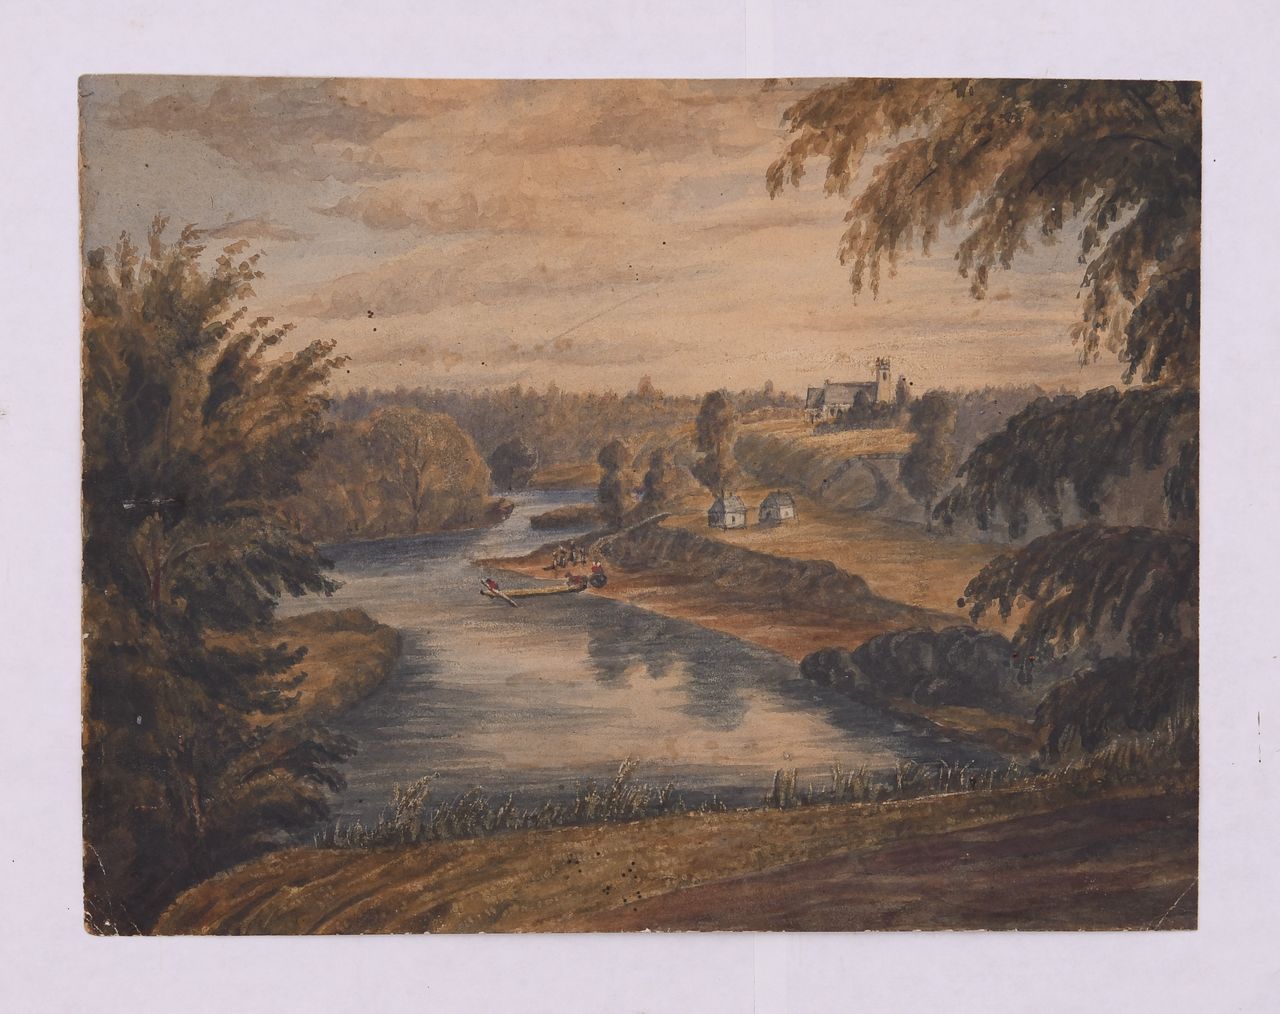 Colour painting depicting the landscape of the Saint Francis River. On the shore, soldiers are mooring a canoe near a camp. The steeple and roof of St. George’s Anglican Church are visible in the distance.